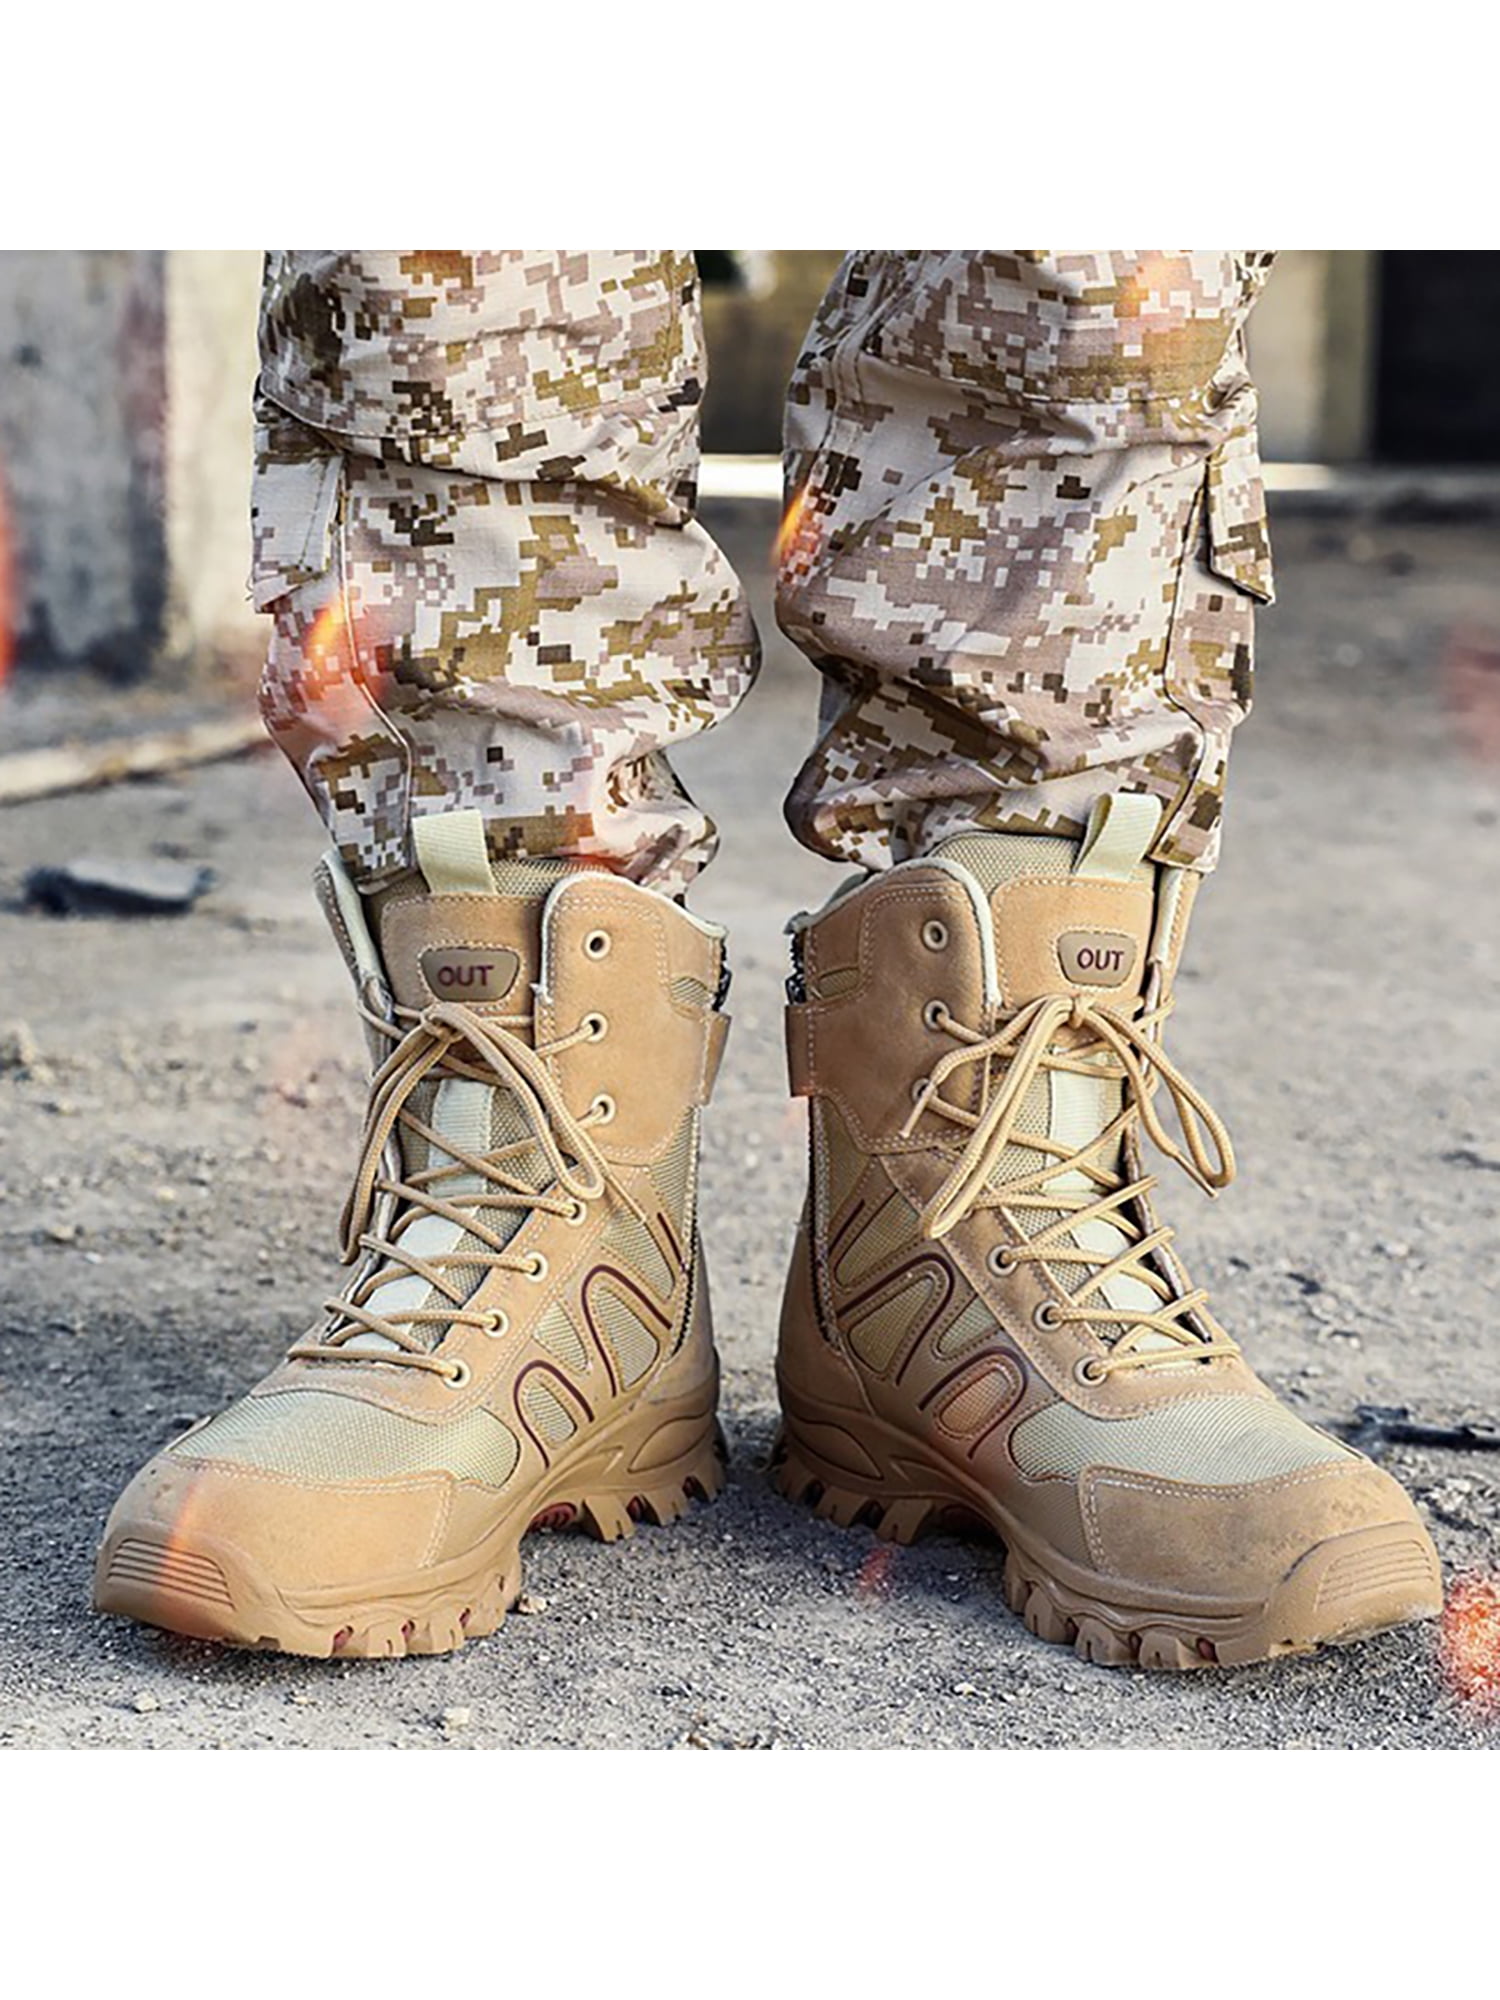 Mens Outdoor Tactical Boot Military Army Combat Patrol Work Boots Hunting Shoes 